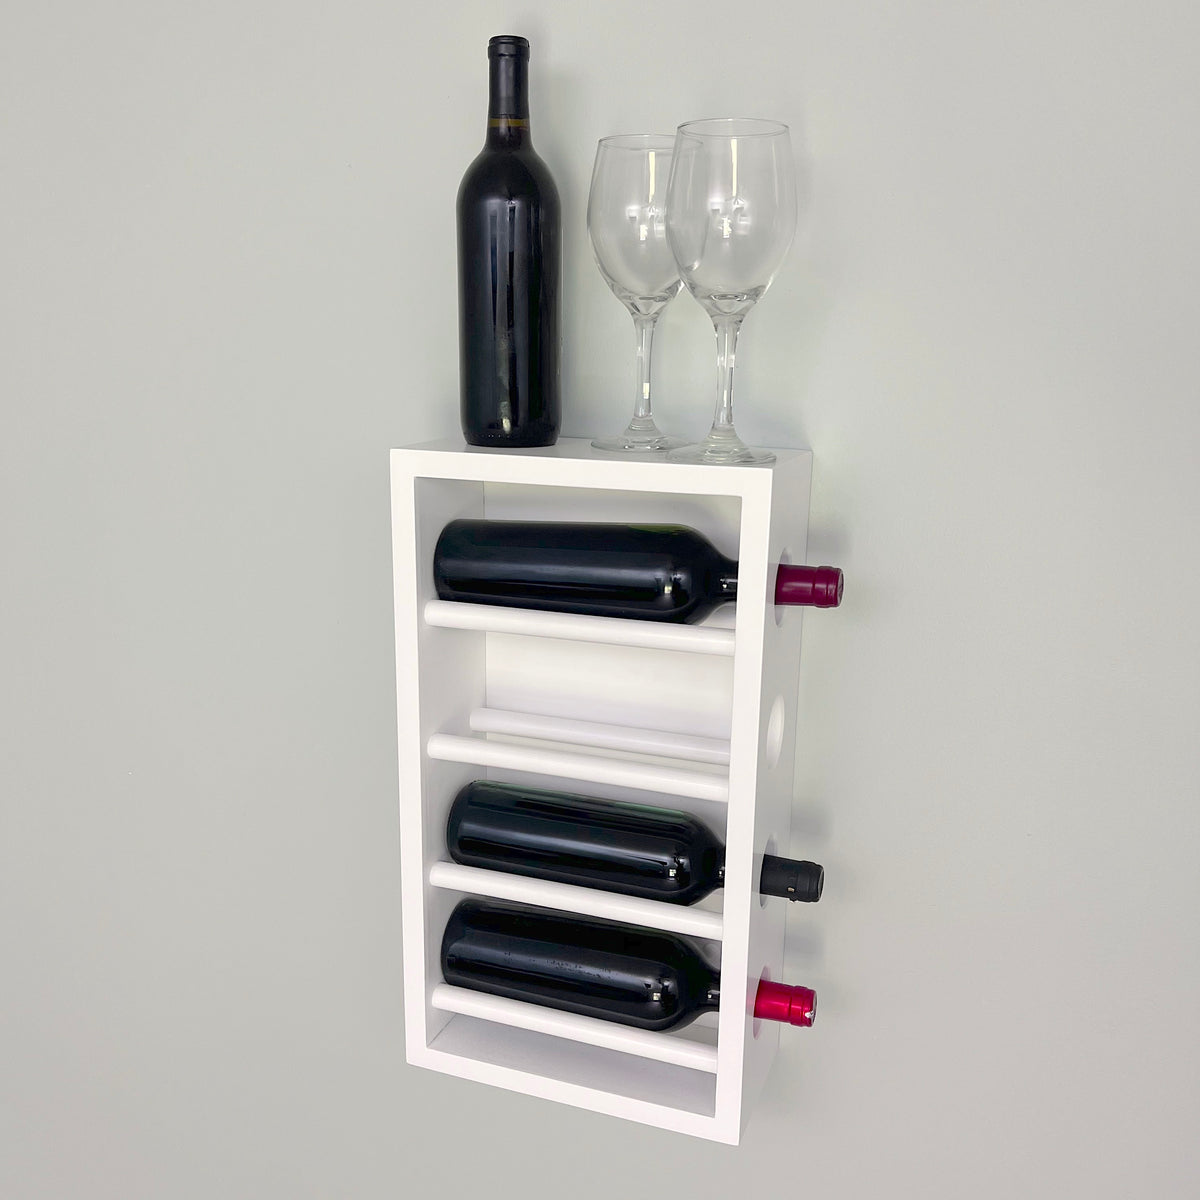 Wine Bottle Rack with Rods